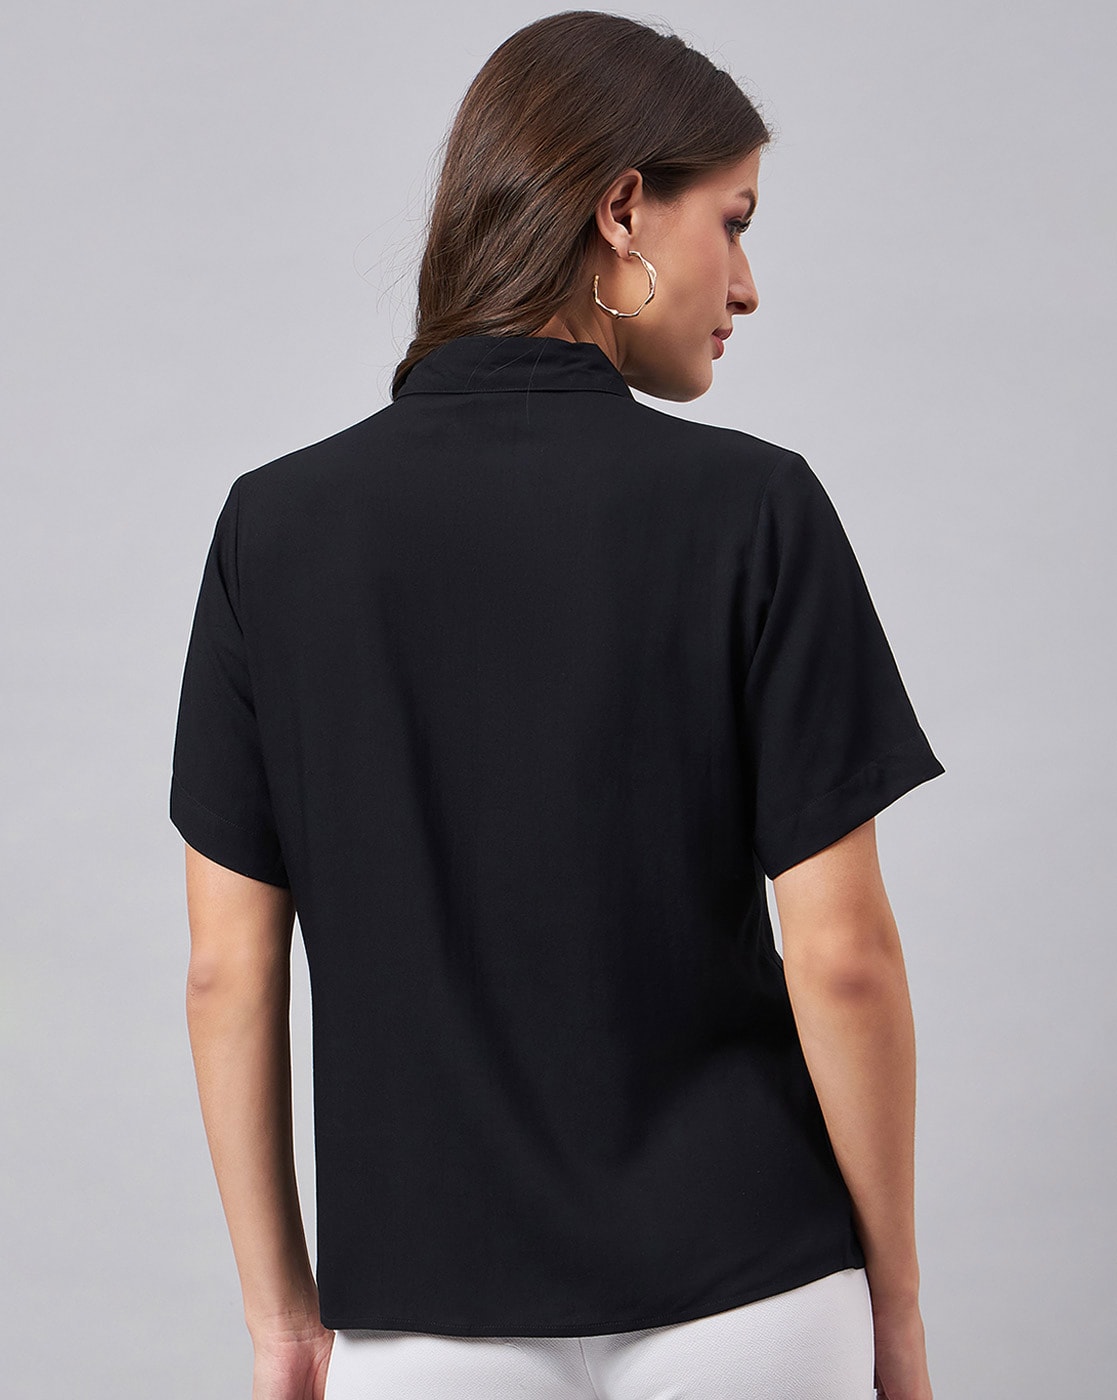 Buy Black Shirts for Women by STYLE QUOTIENT Online